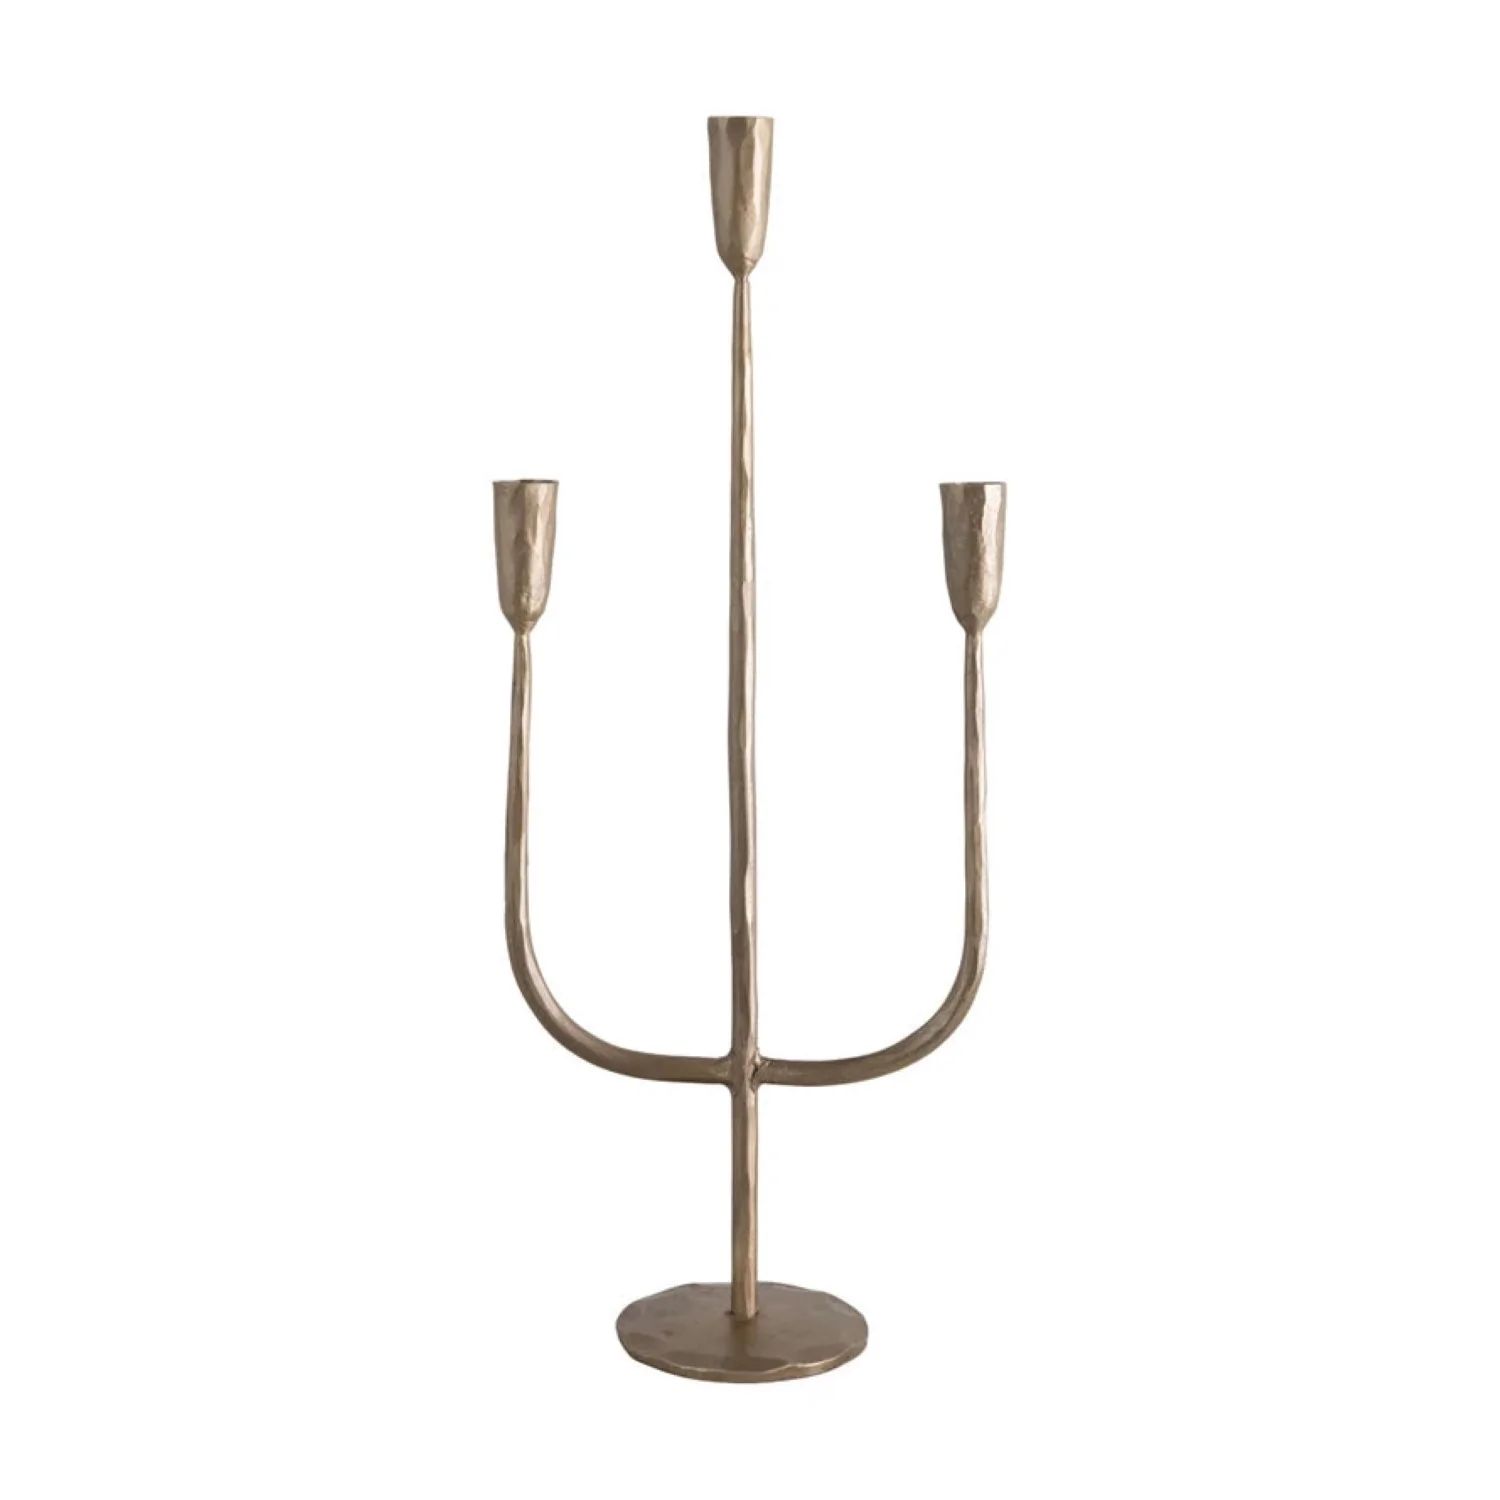 Hand-Forged Metal Candelabra with Antique Finish | Burke Decor